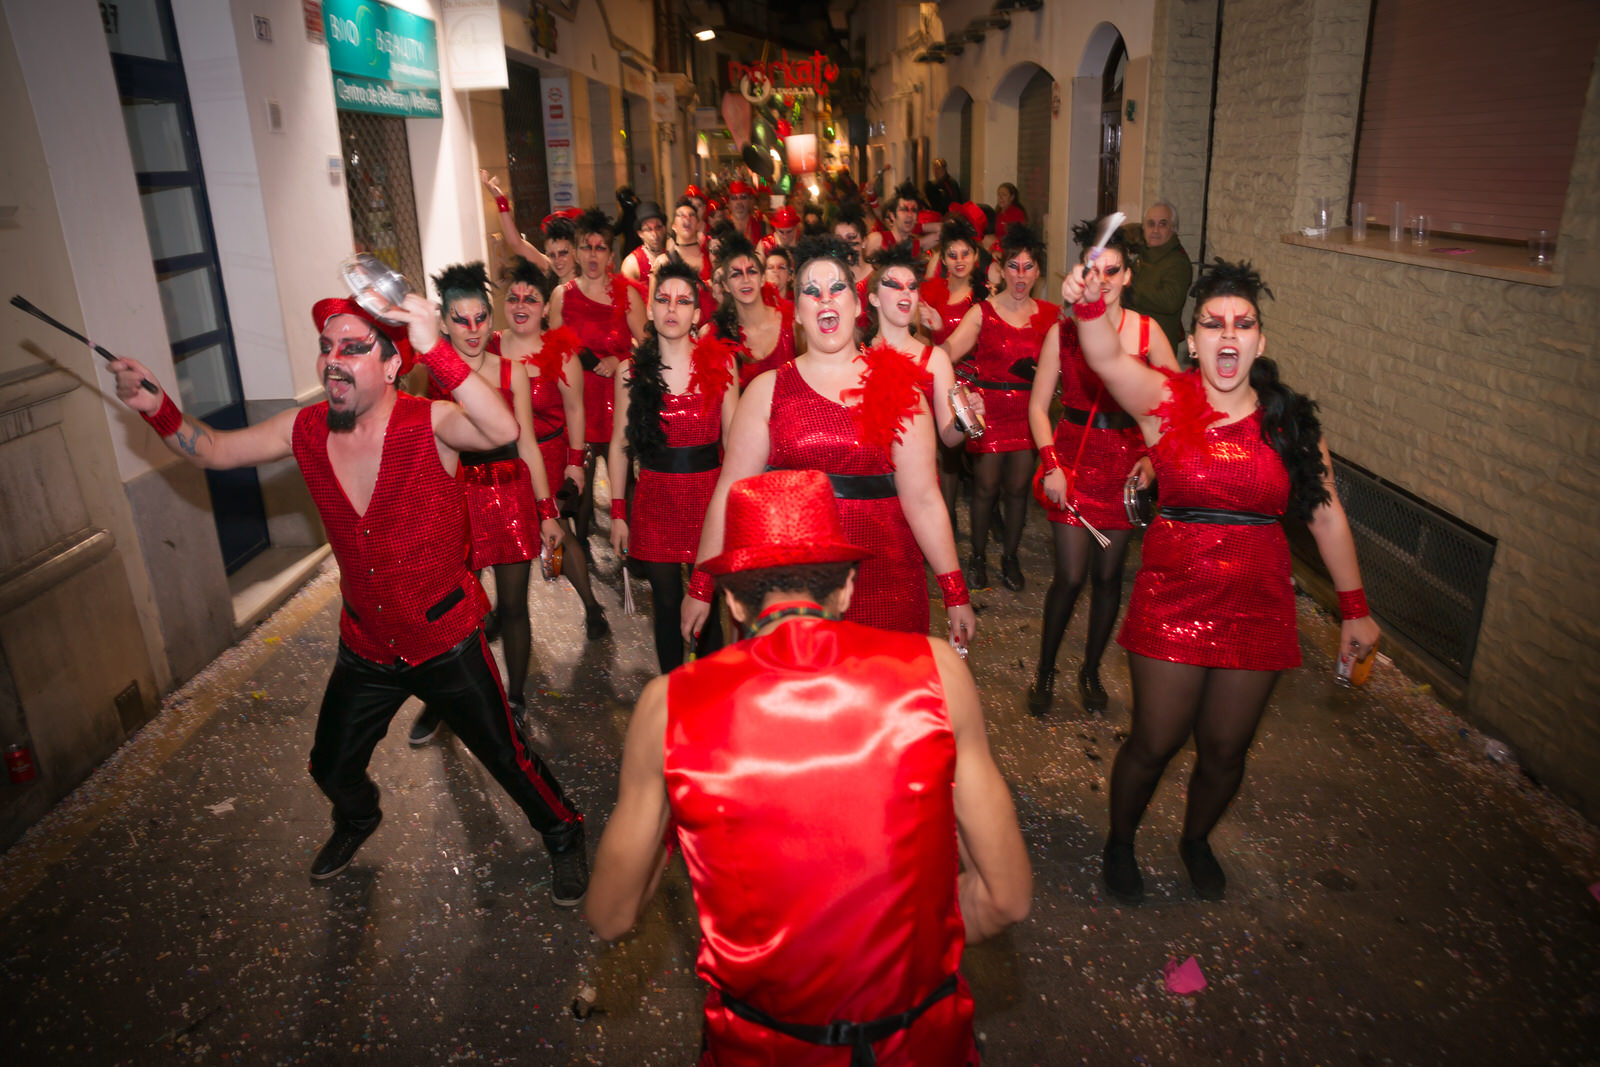 Revellers head for Carrer del Pecat (‘Sin Street’) in Sitges, the location of one of the many distinctive carnivals of Catalonia